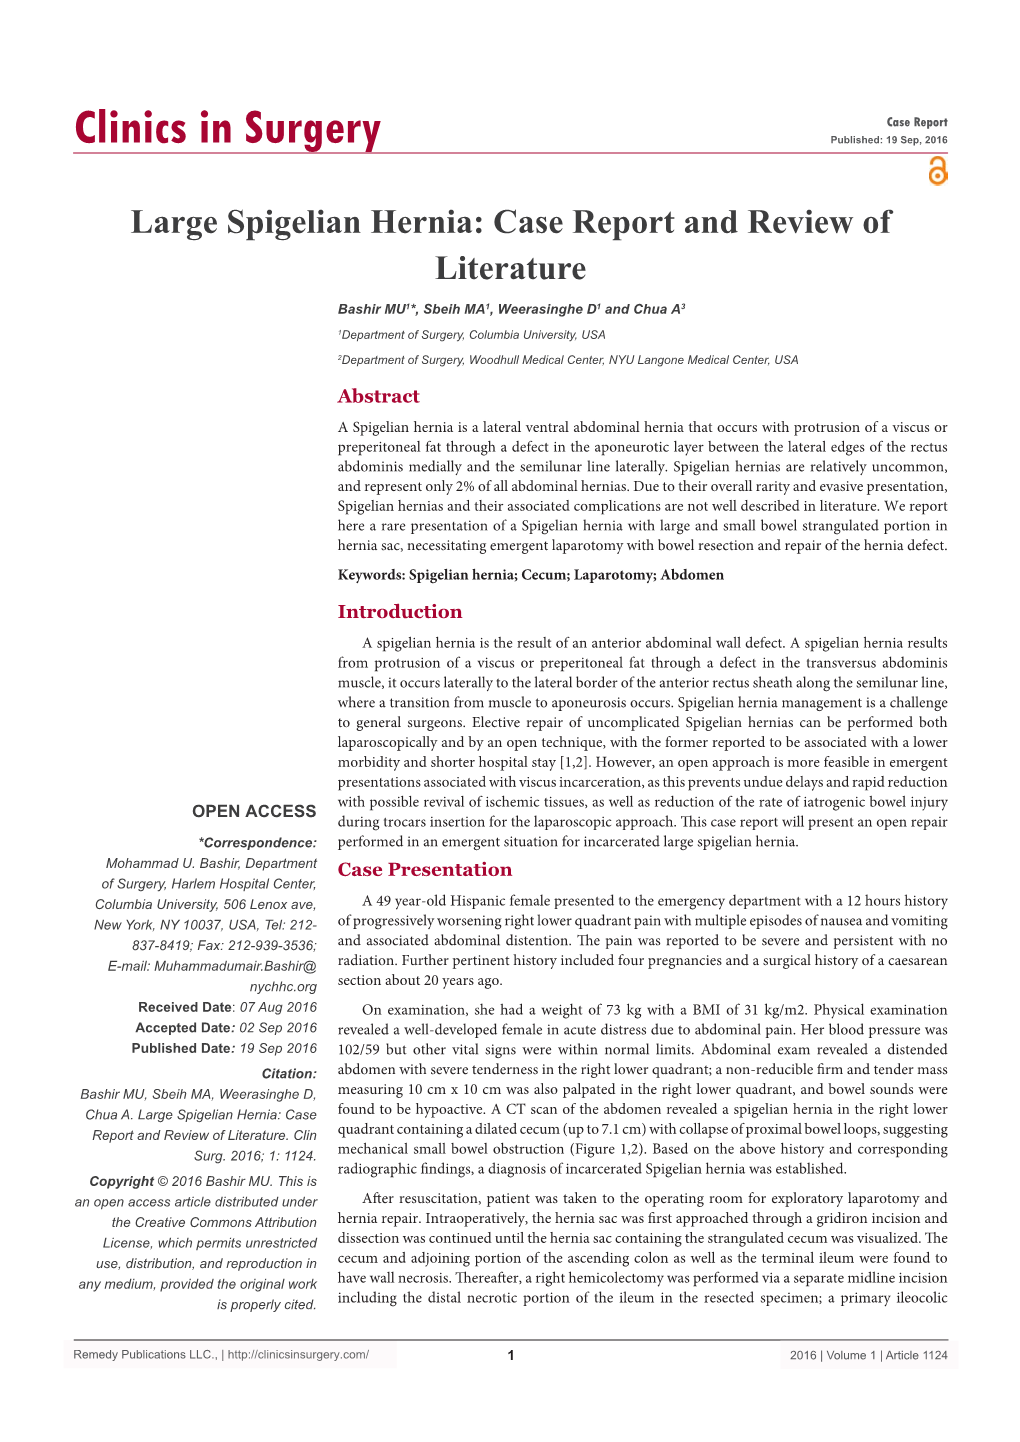 Large Spigelian Hernia: Case Report and Review of Literature